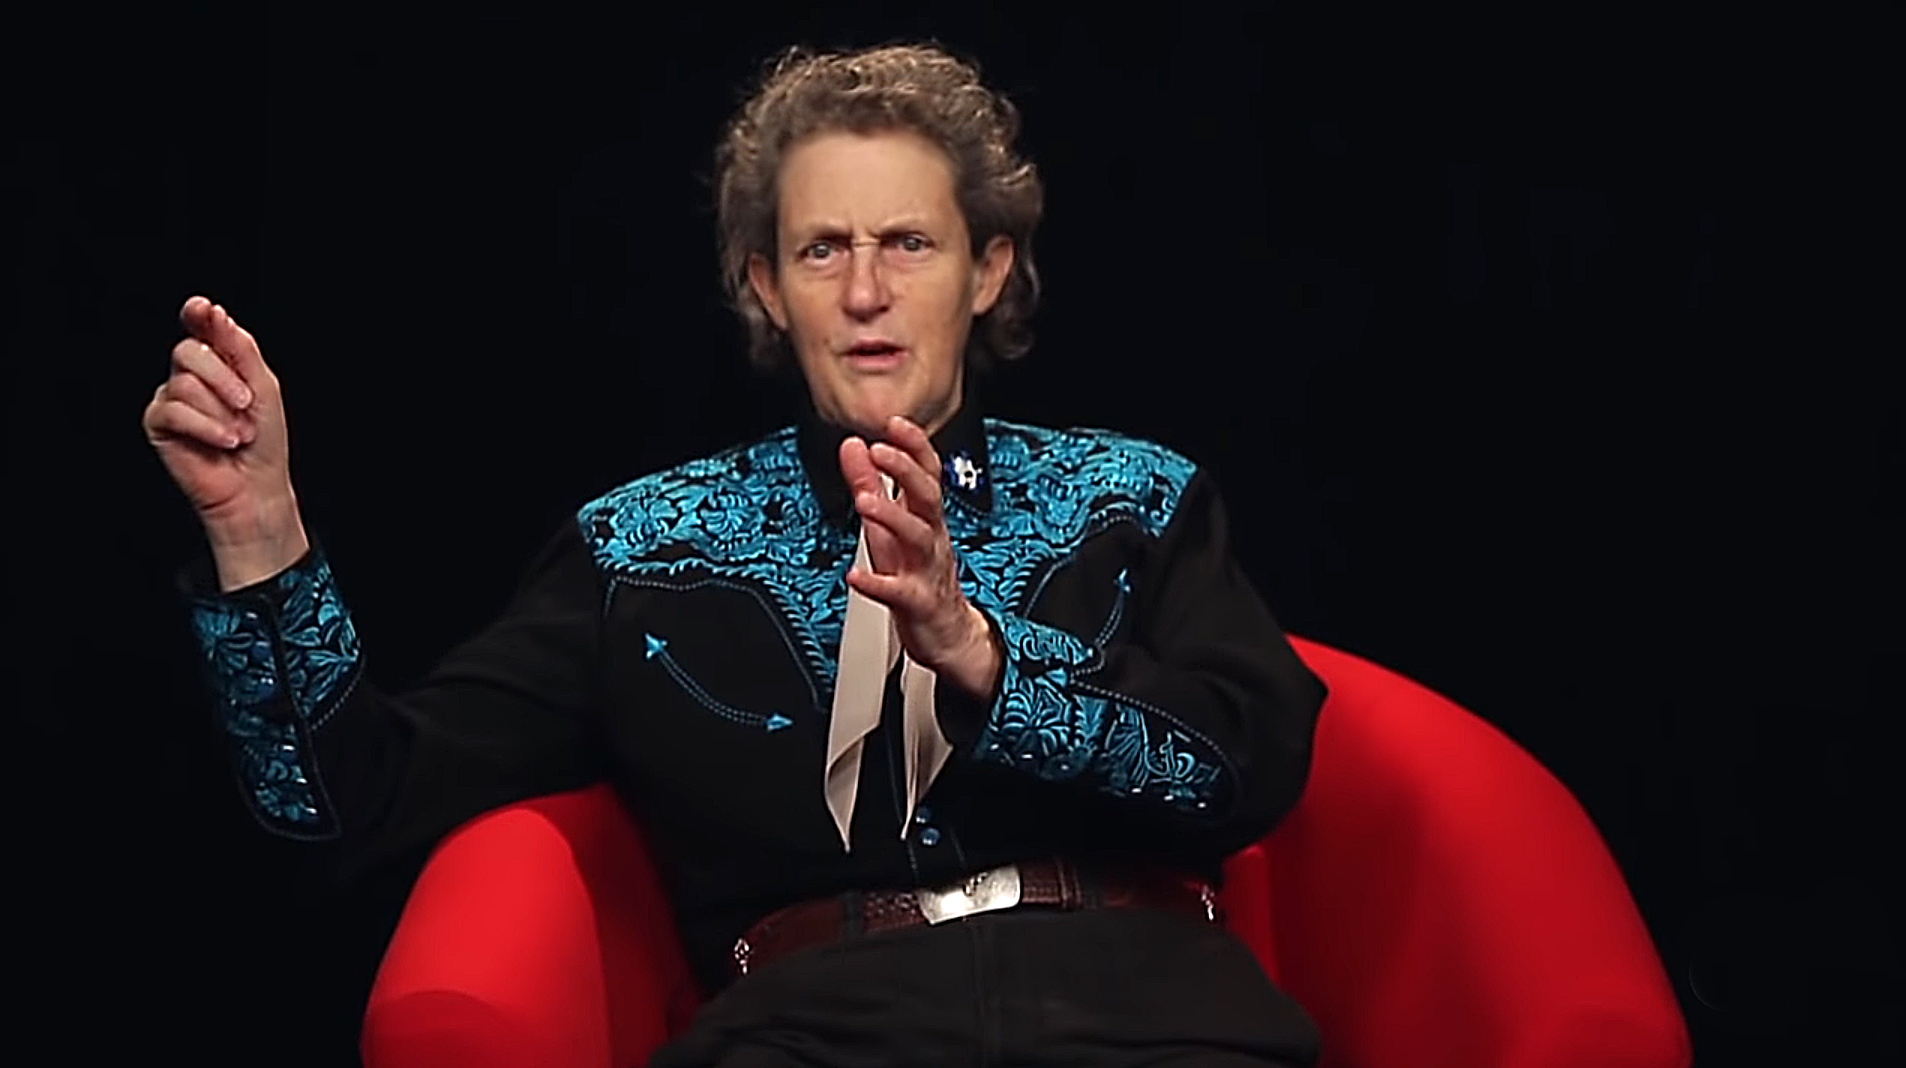 Temple Grandin sitting on red couch wearing a black and blue western shirt and pants.